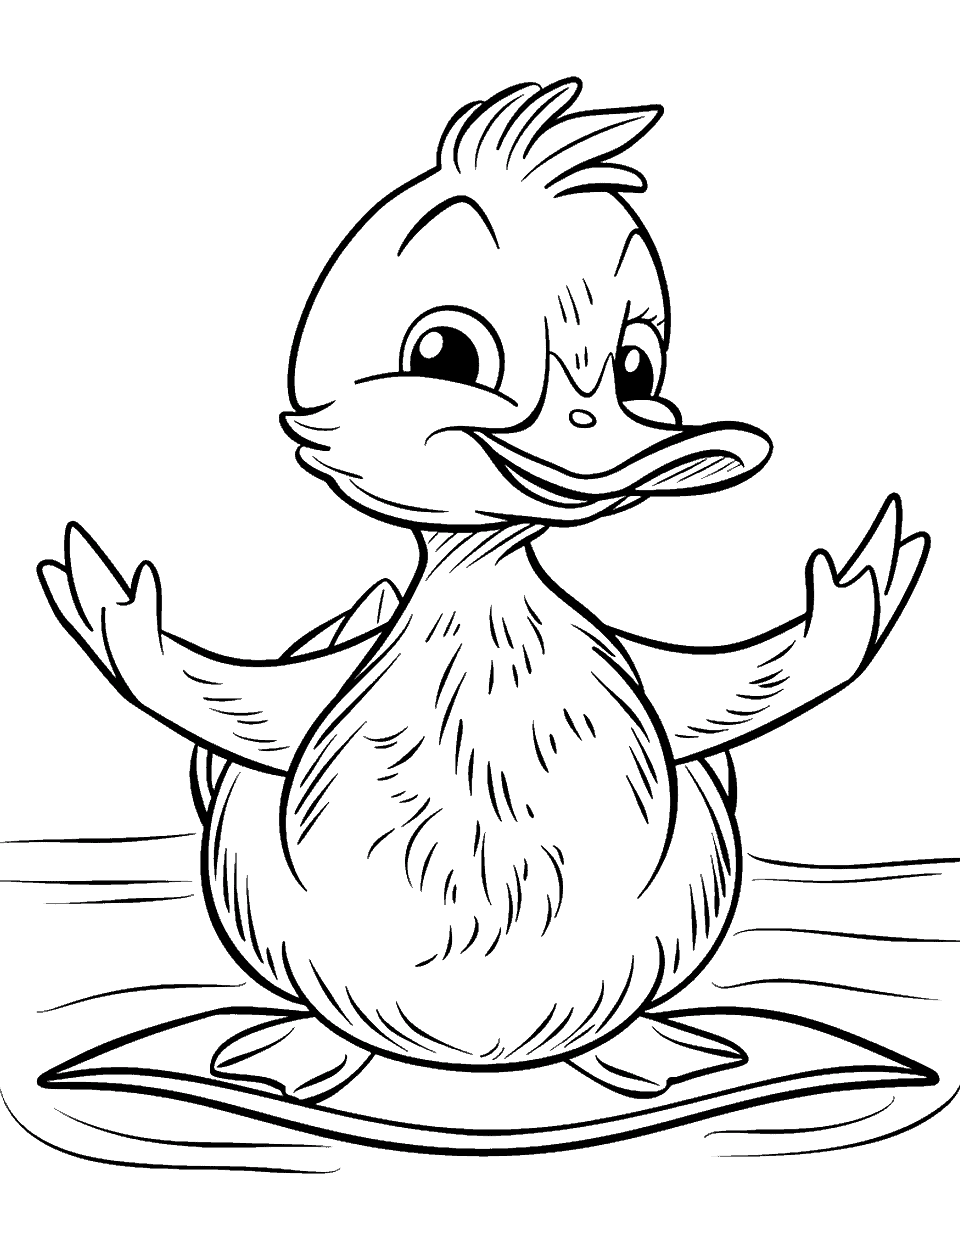 Yoga Duck Coloring Page - A relaxed duck practicing yoga with a peaceful expression.